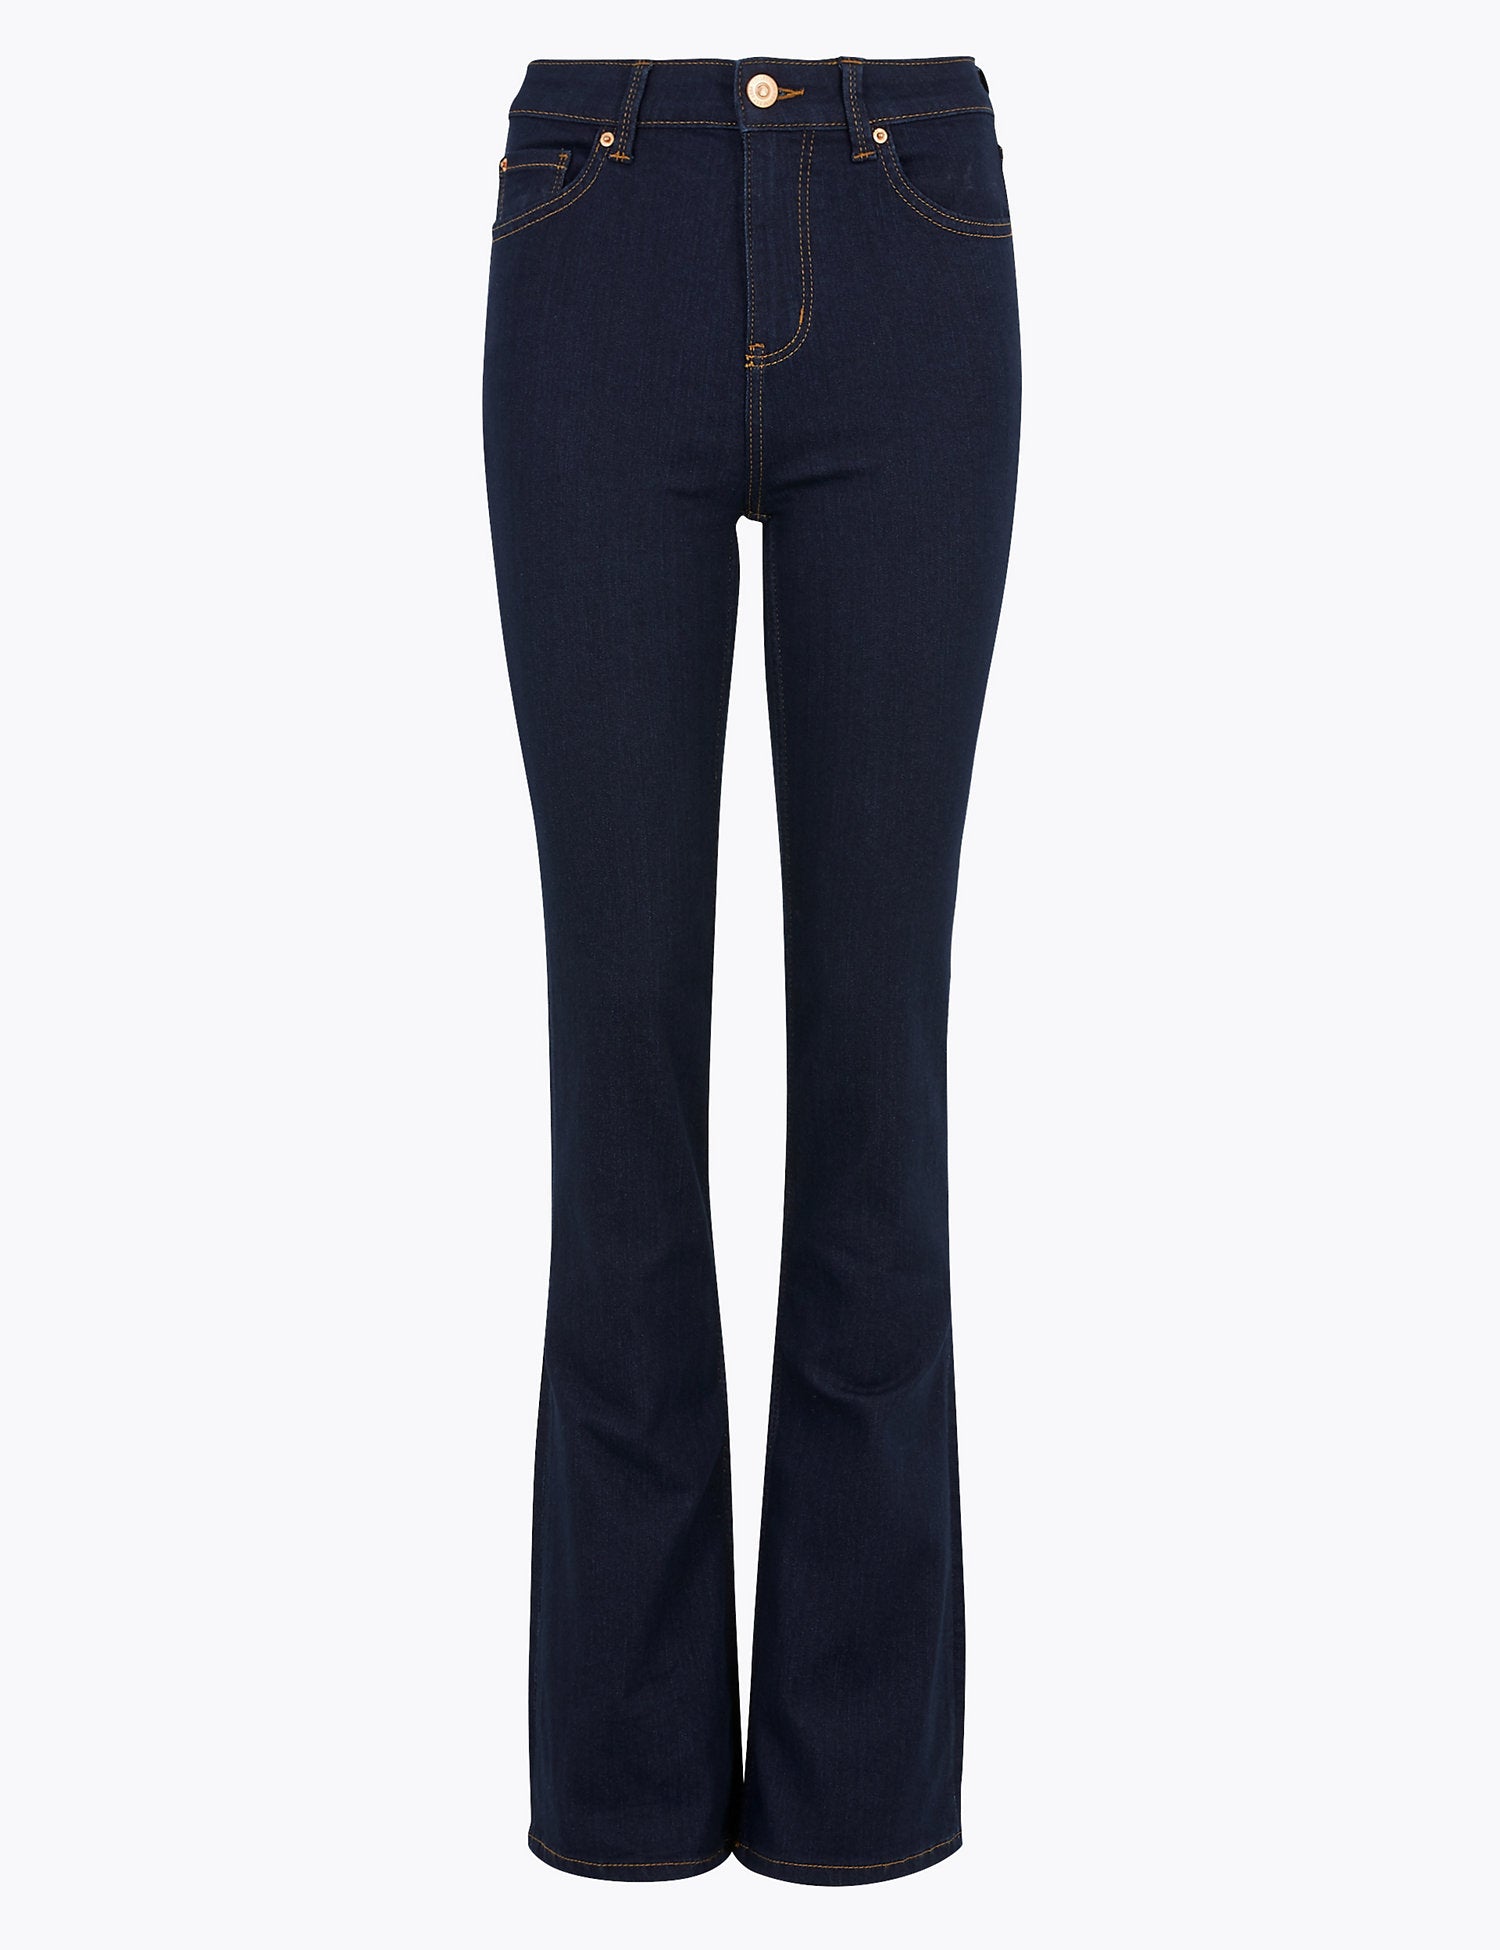 Flared Pants / Flares: 90s (Late y2k 2000s, 2007) -Lucky Brand